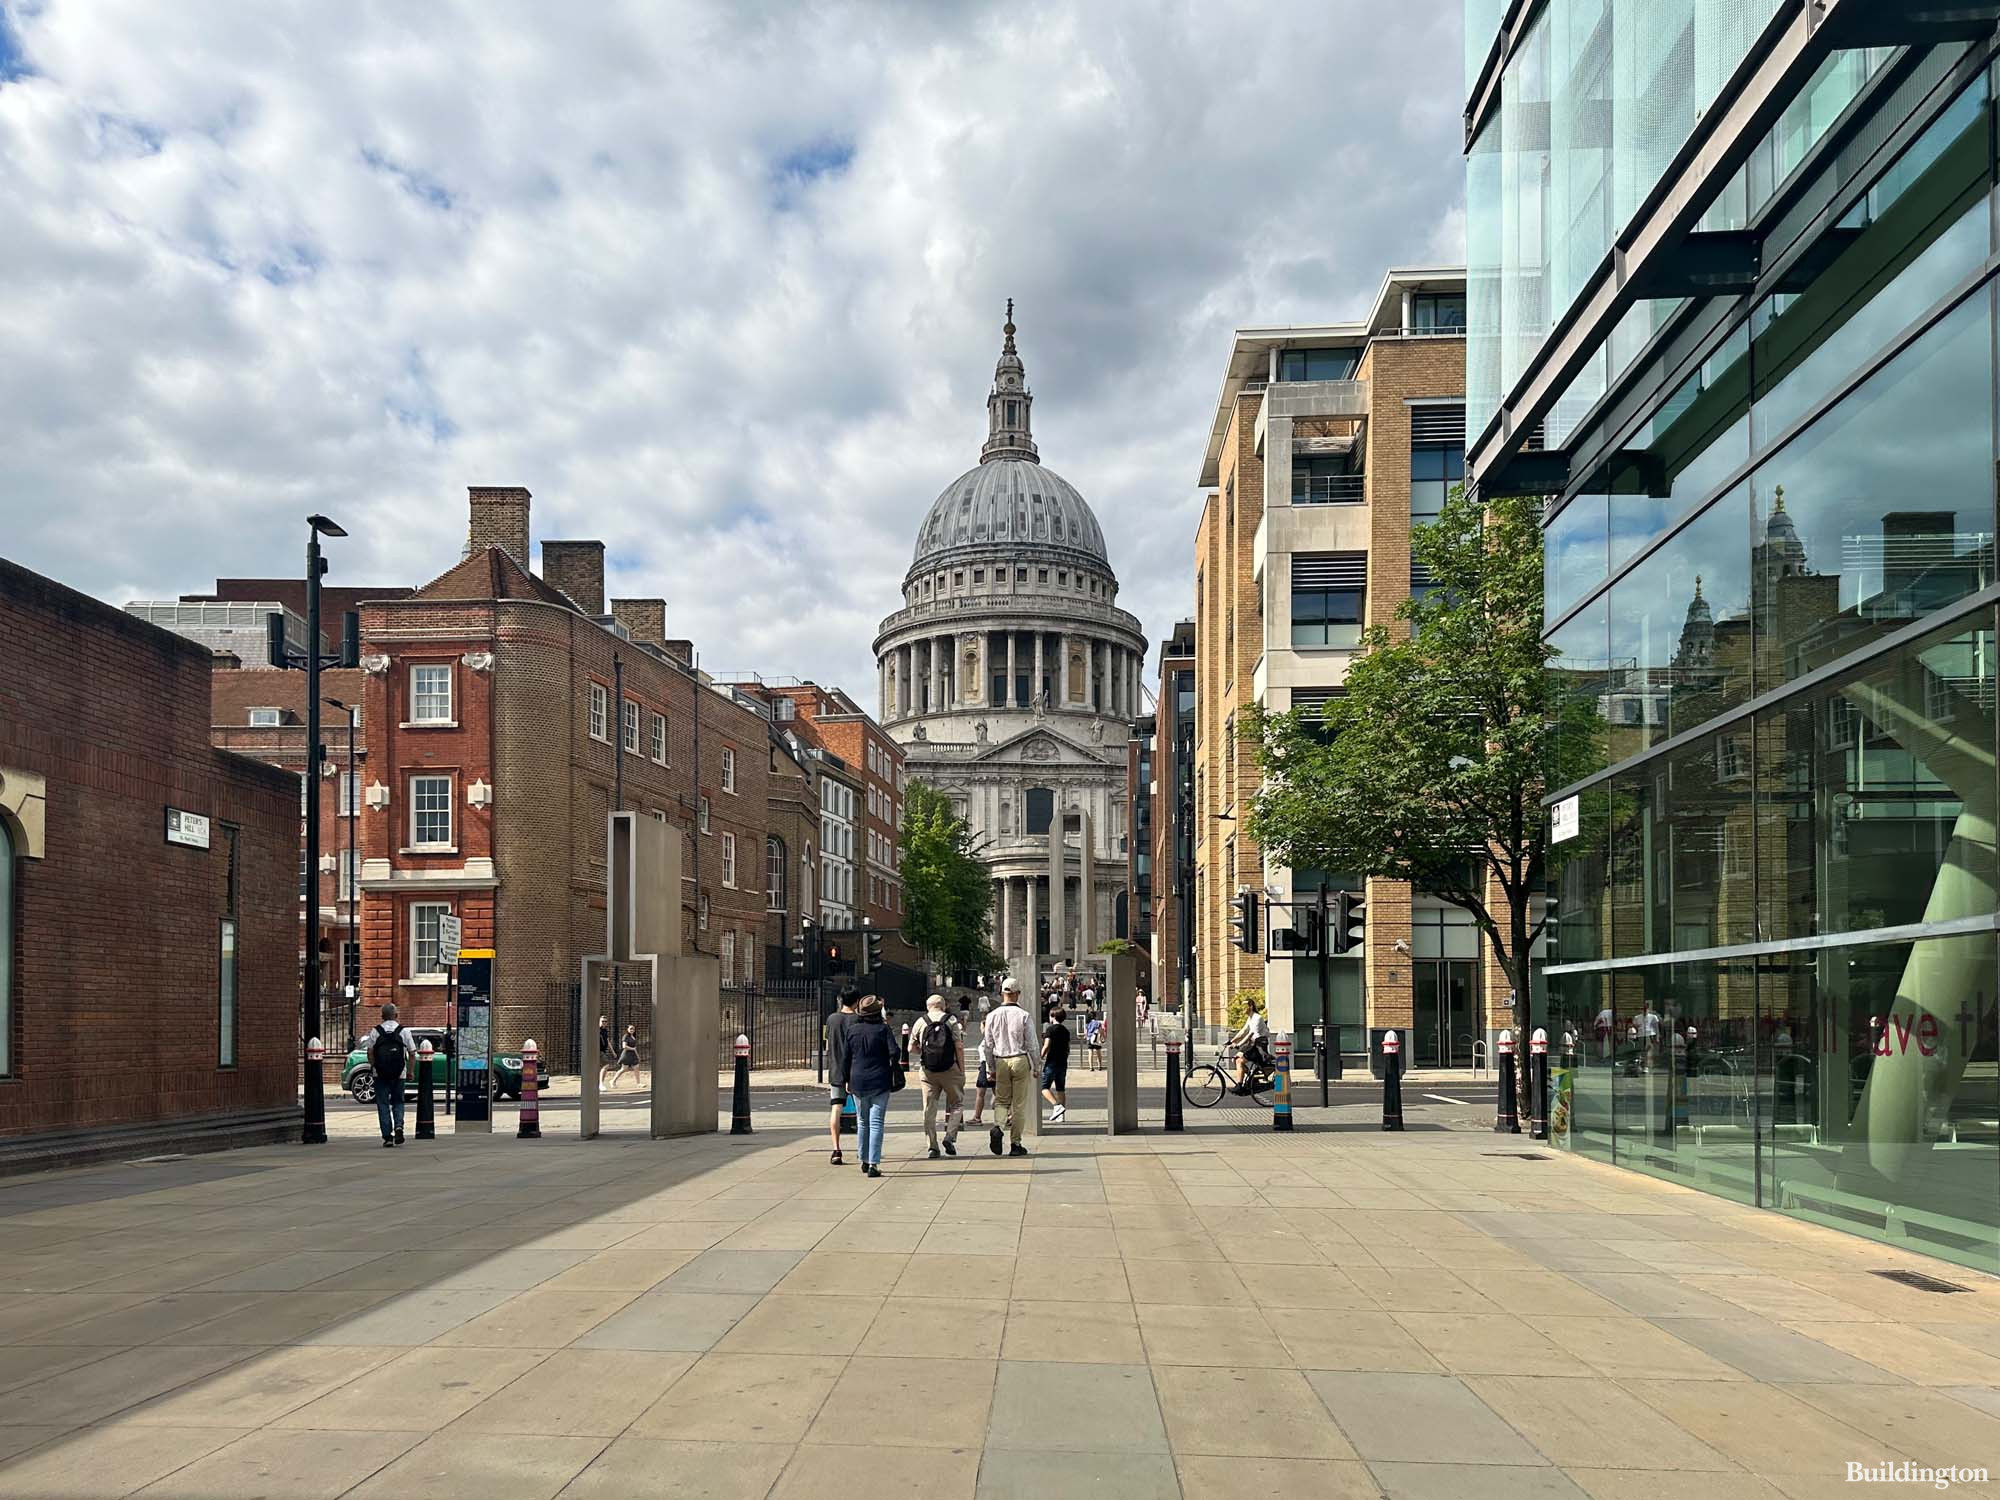 St Paul's Cathedral from Sermon Lane.